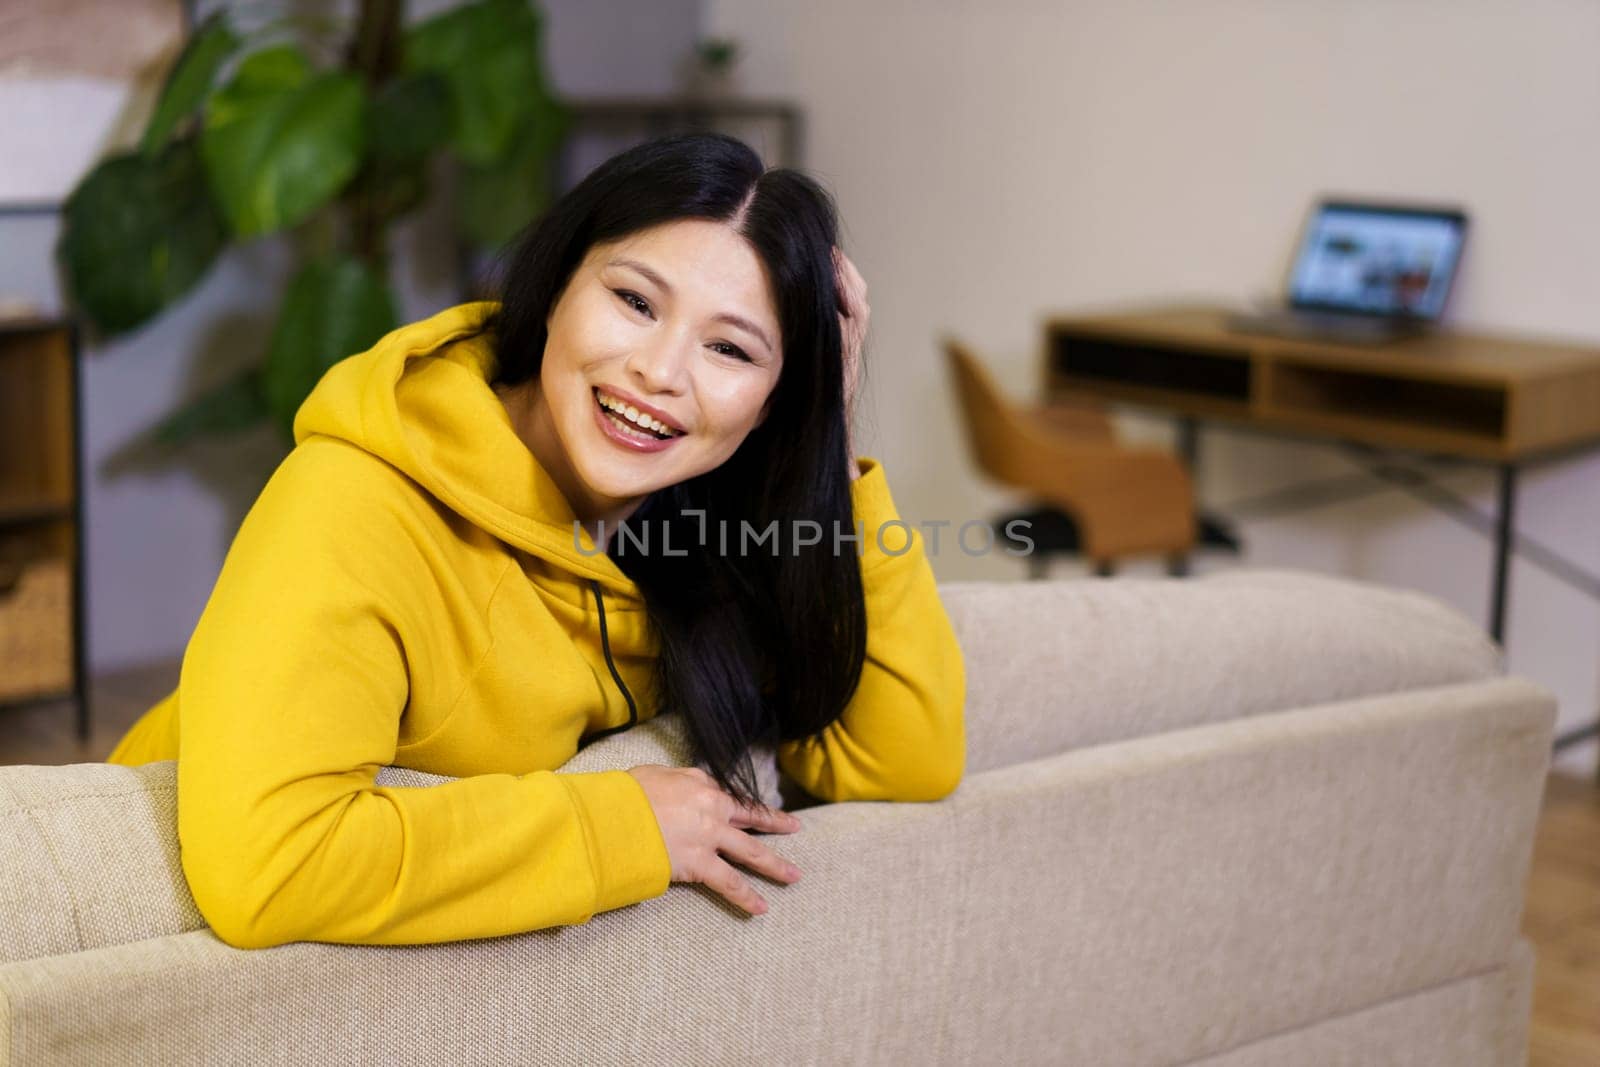 Beautiful middle-aged Asian woman is captured resting on a sofa in her home, surrounded by the comfort and coziness of her indoor space. The background reveals a desktop with a laptop, symbolizing the balance of work and leisure in her lifestyle. High quality photo